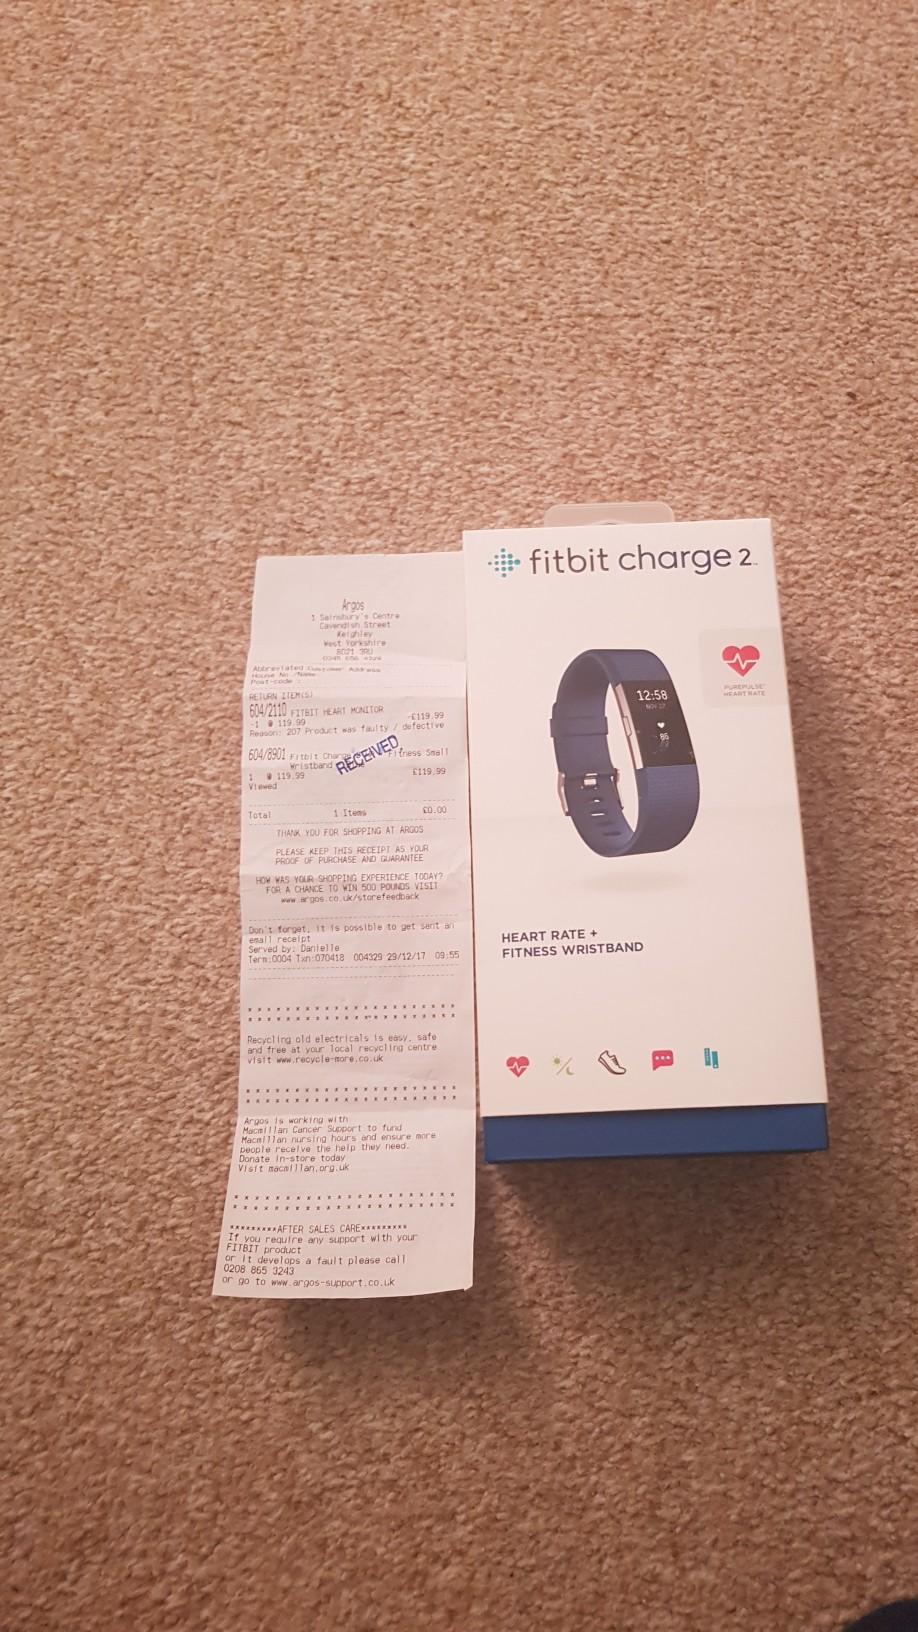 fitbit 3 charger argos